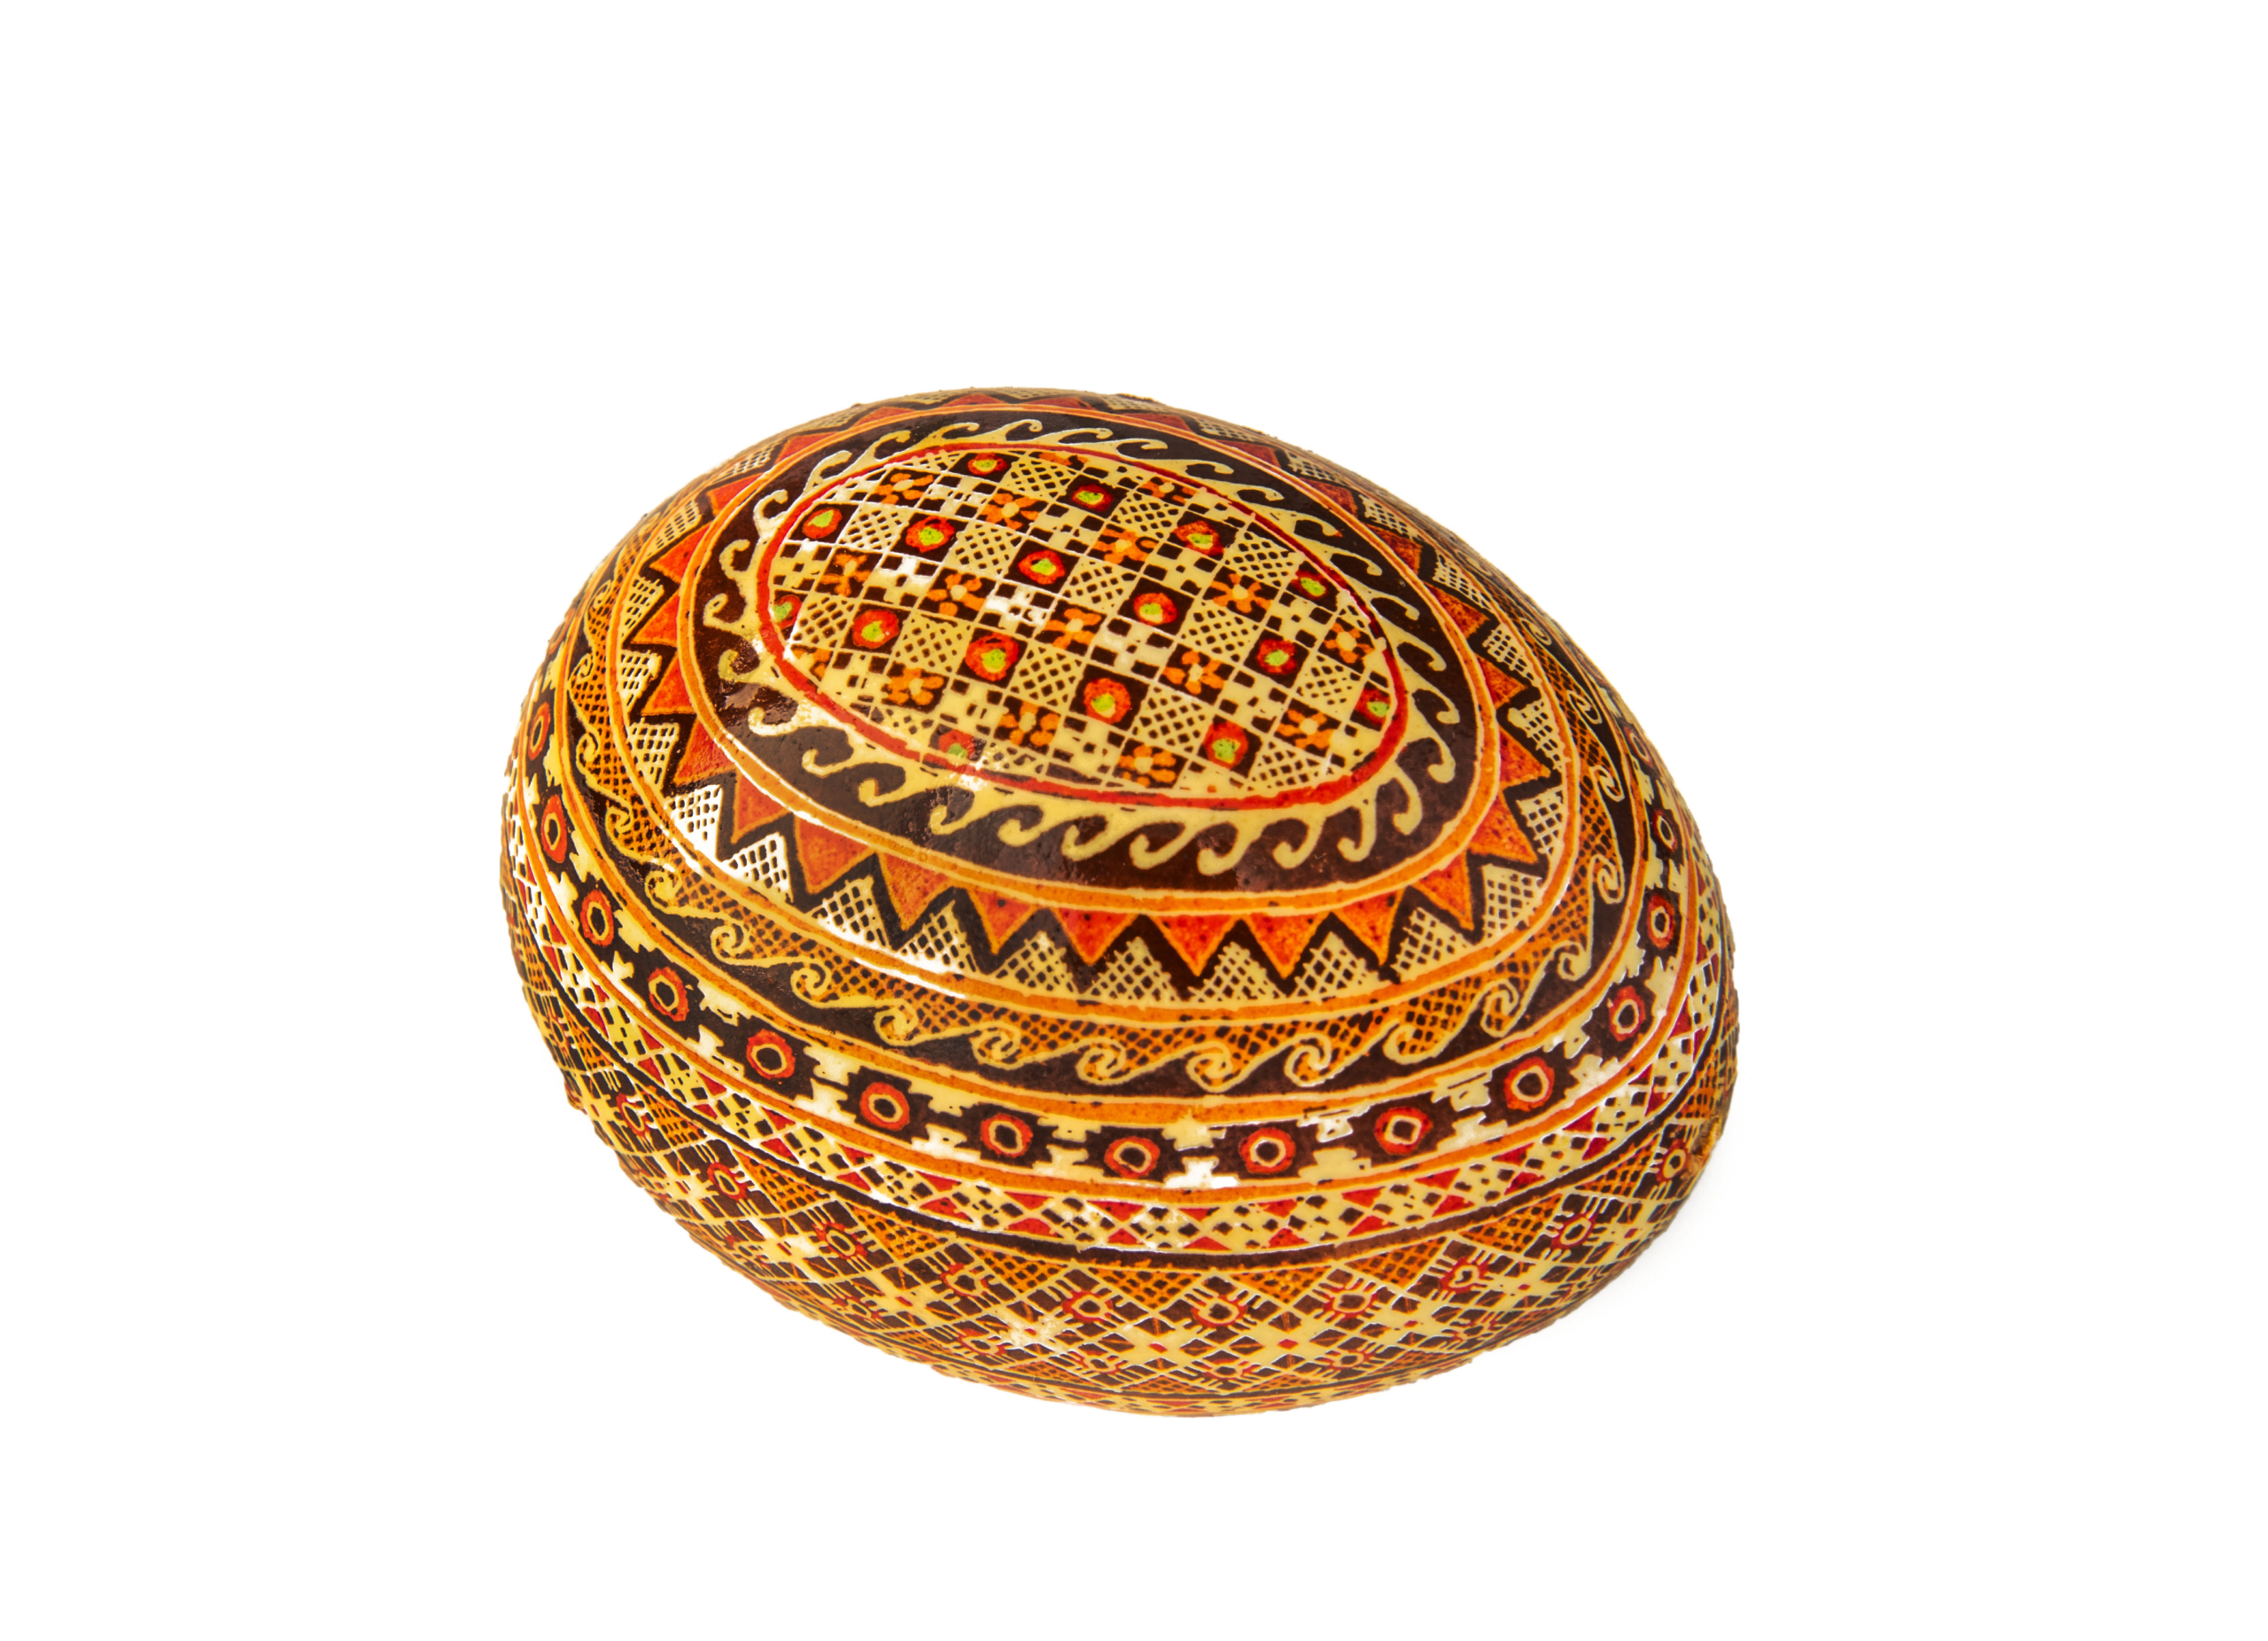 Egg with red, yellow and brown geometric patterns